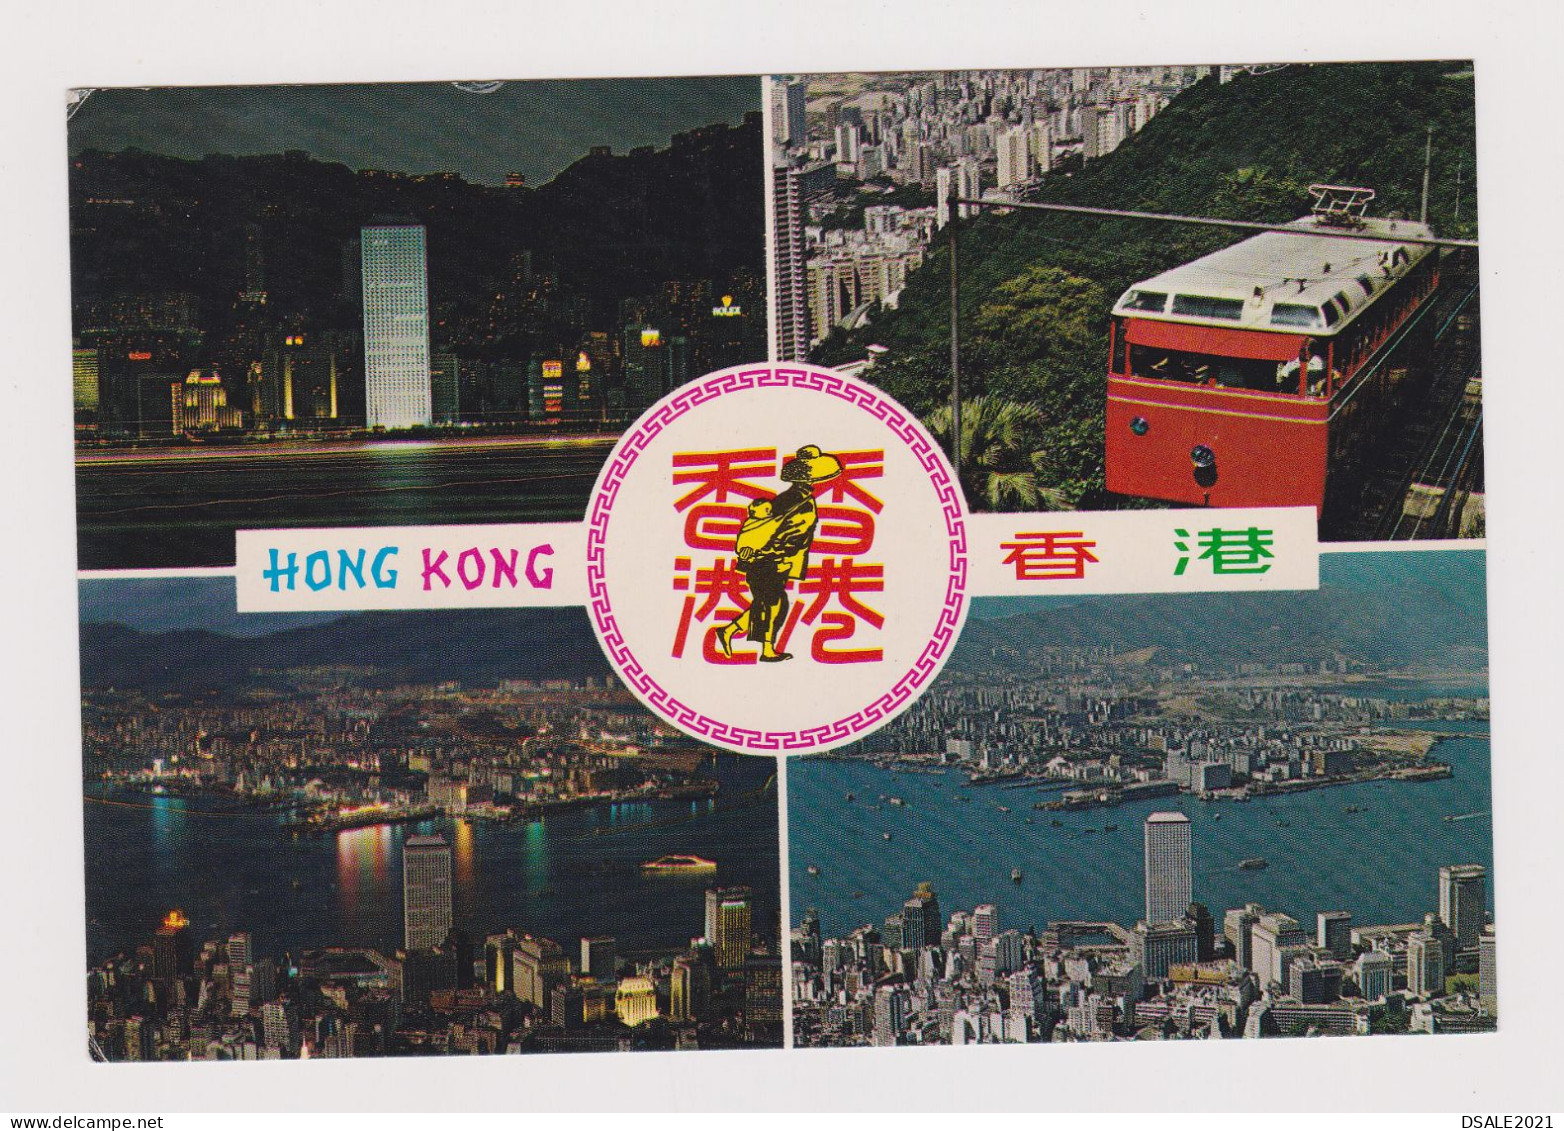 HONG KONG Four Views By Night, Peak Tramway, Vintage Photo Postcard 1980 Sent Airmail W/Topic Stamp To Bulgaria (727) - Covers & Documents